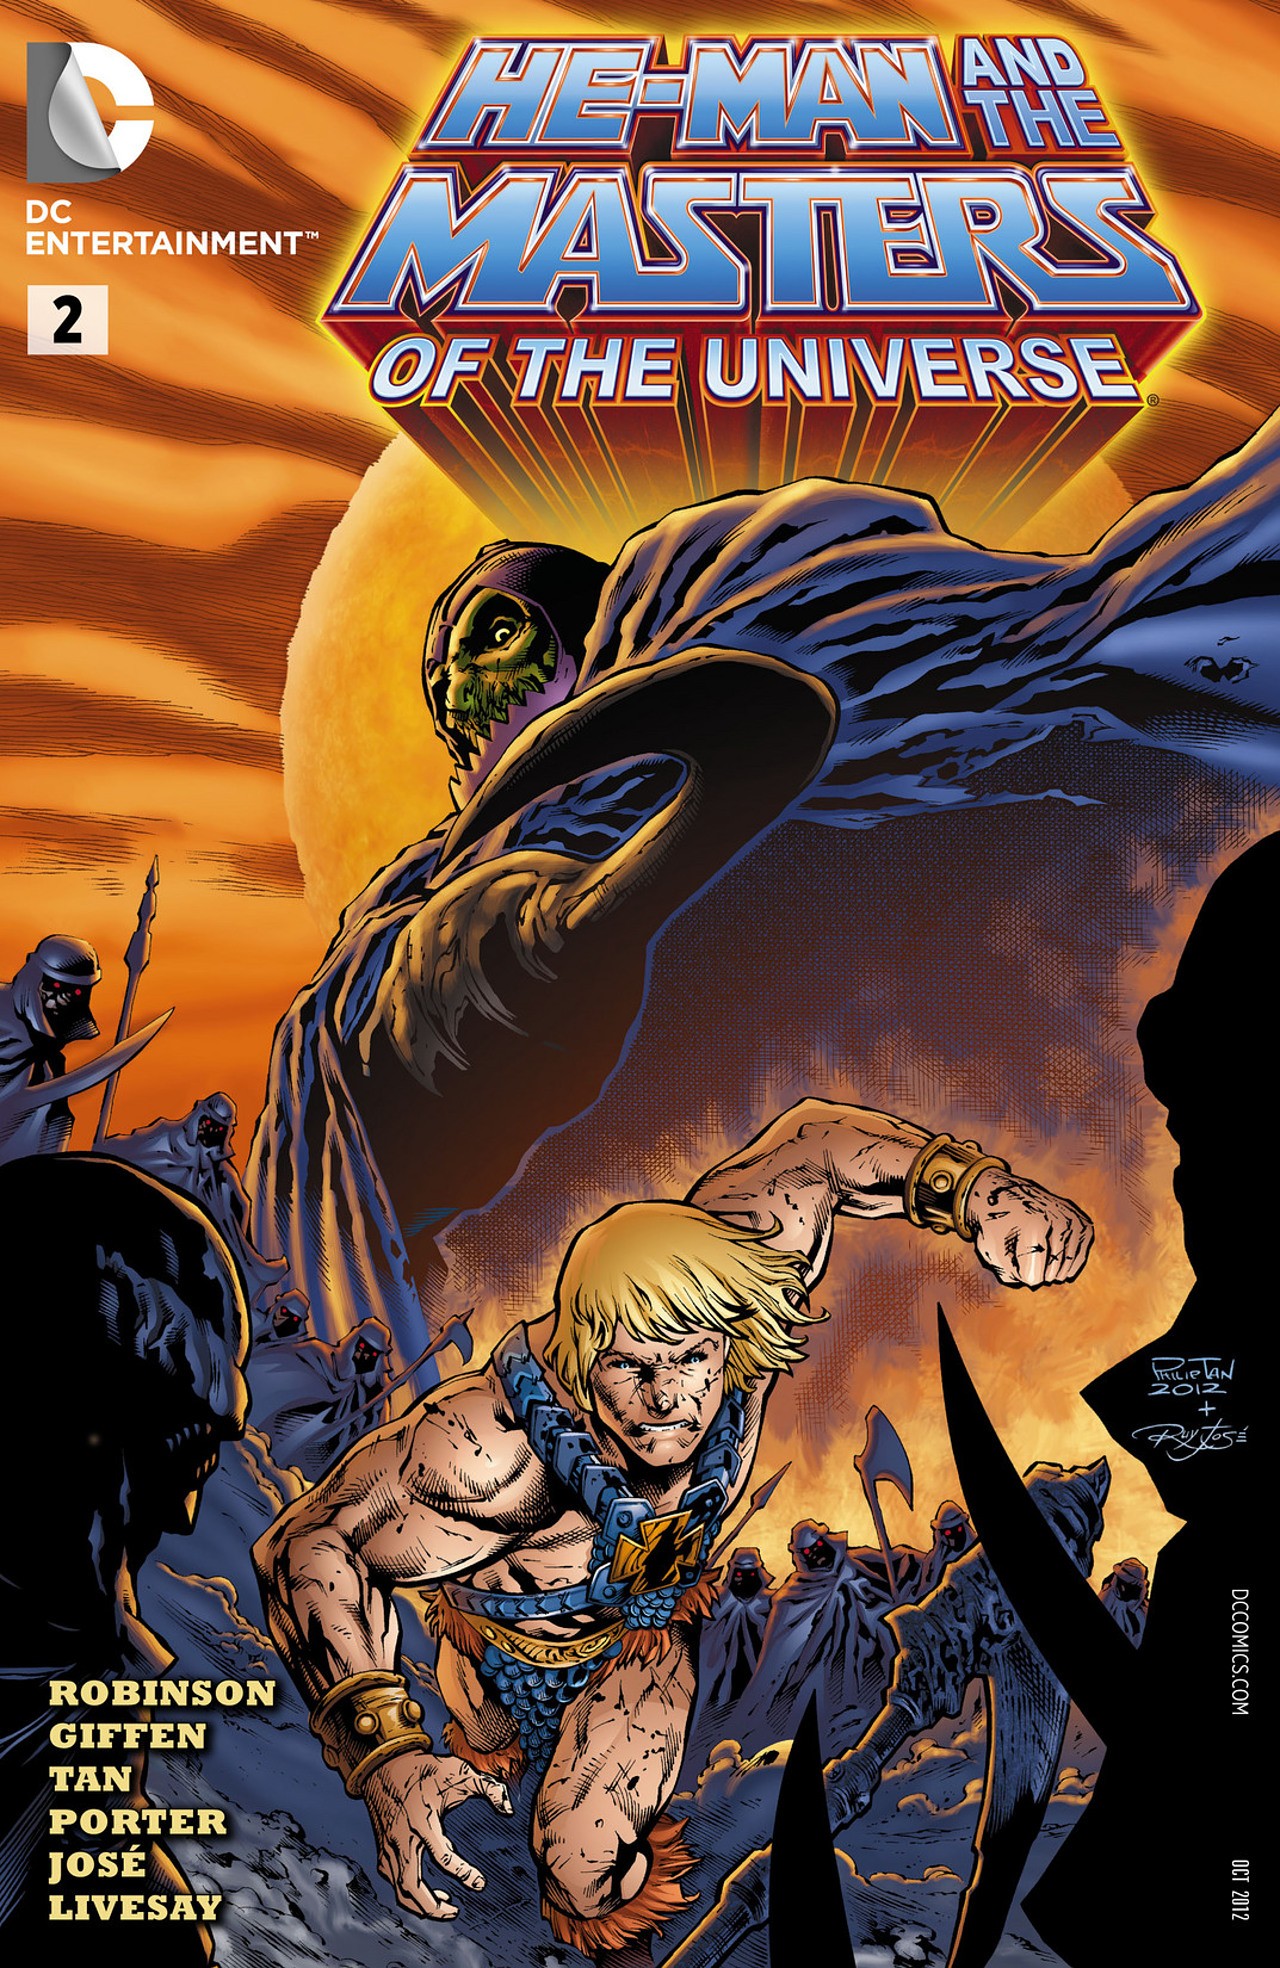 He-Man and the Masters of the Universe Vol. 1 #2